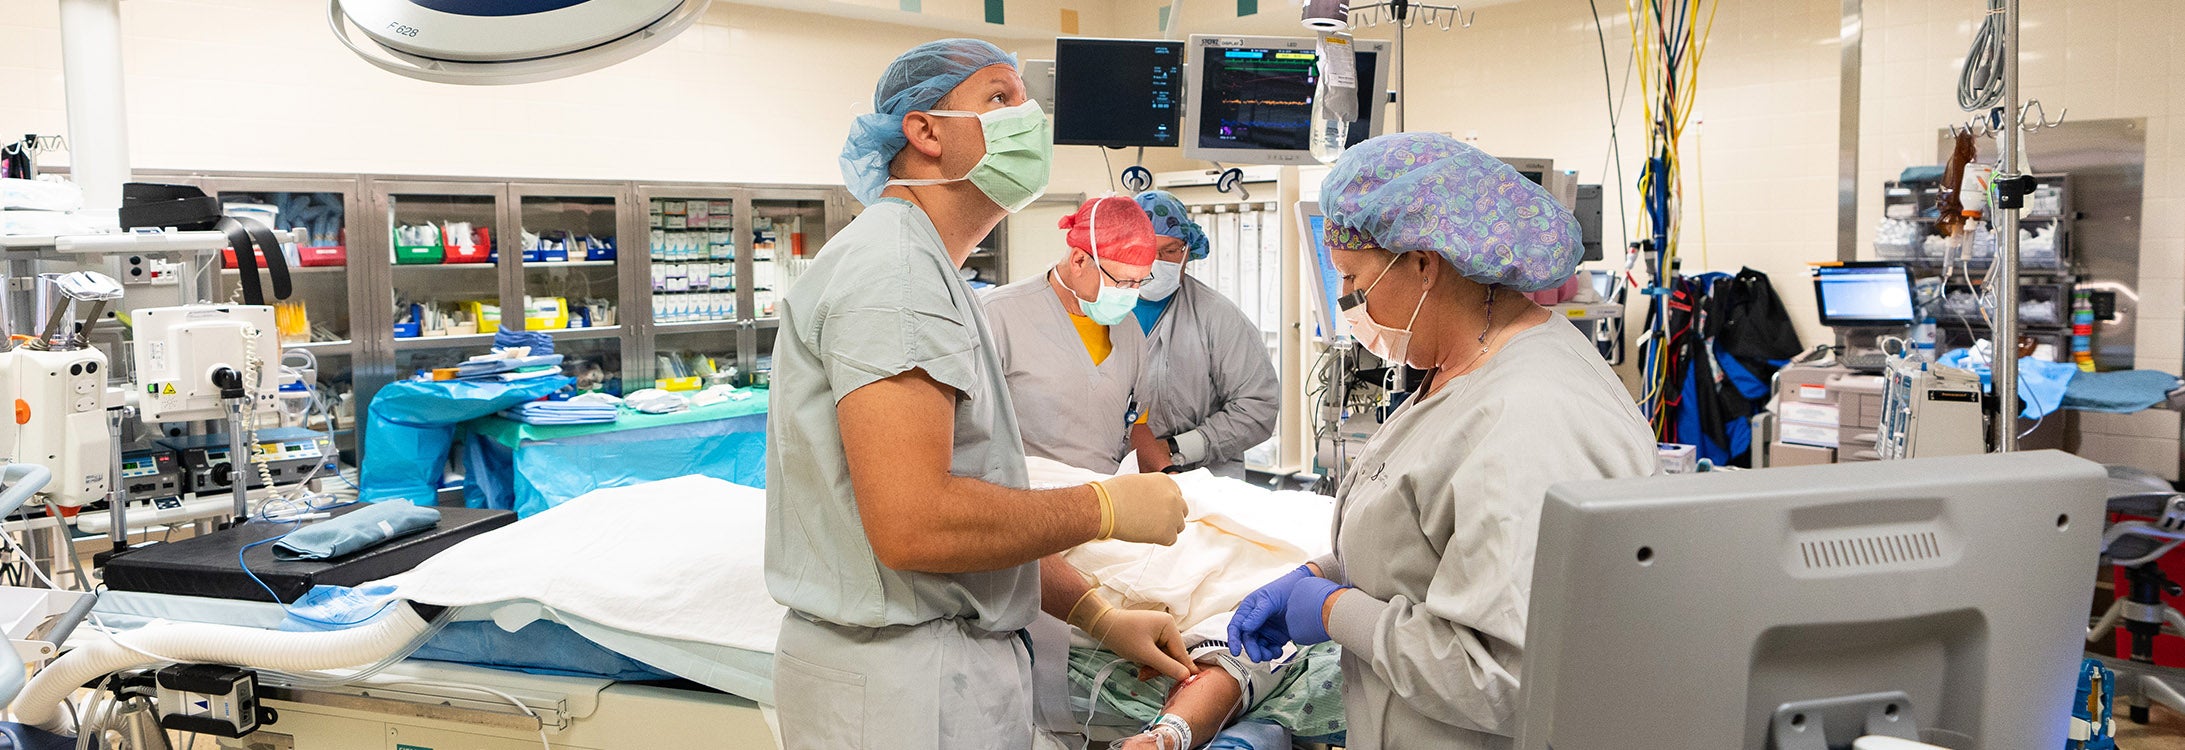 Dr. Bryan Ehlert, assistant professor in the Division of Vascular Surgery at ECU’s Brody School of Medicine, performs a TCAR procedure at the East Carolina Heart Institute at Vidant Medical Center. (Photos by Cliff Hollis)